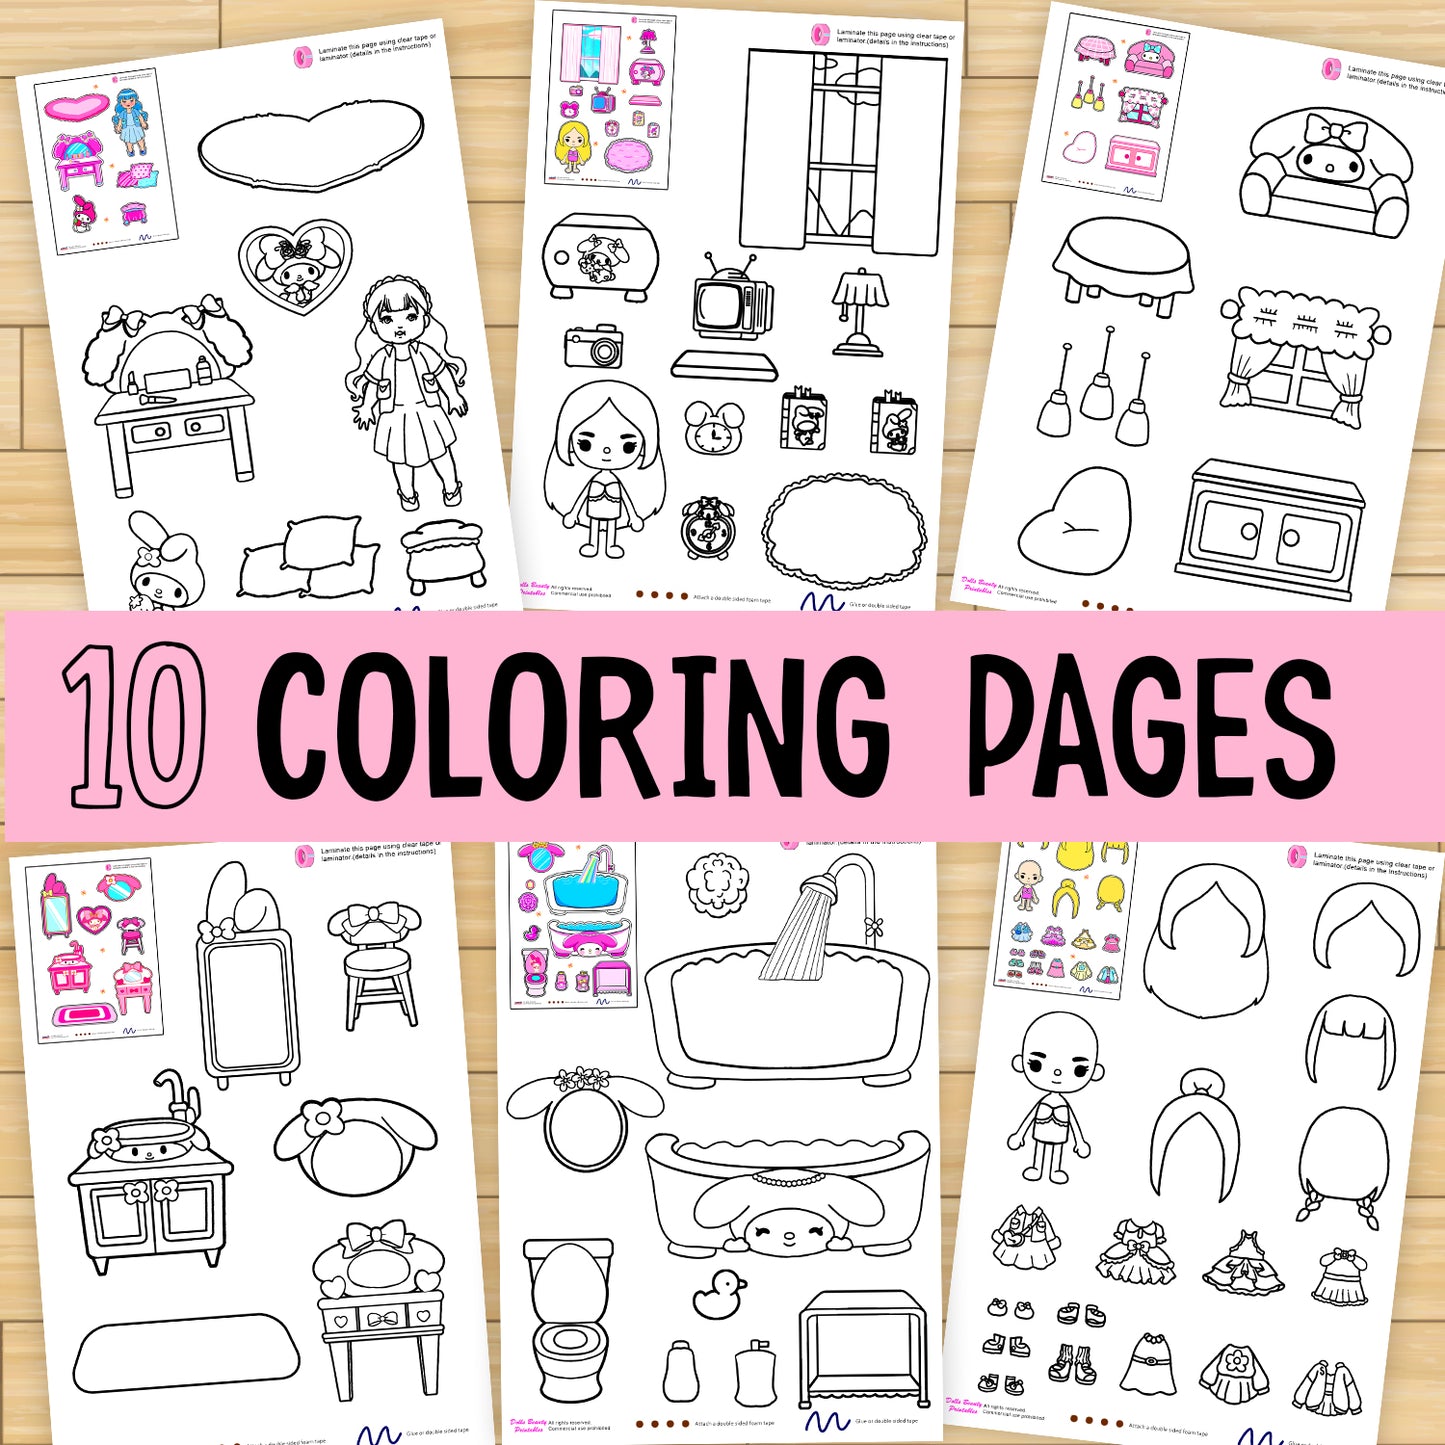 Color Toca Boca Paper Doll and Clothes 🌈 Toca Boca papercraft | 10 Coloring Pages for Toddler | Printable Paper Doll | Coloring Sheets Book | Improve Motor Skills 🌈 Woa Doll Crafts